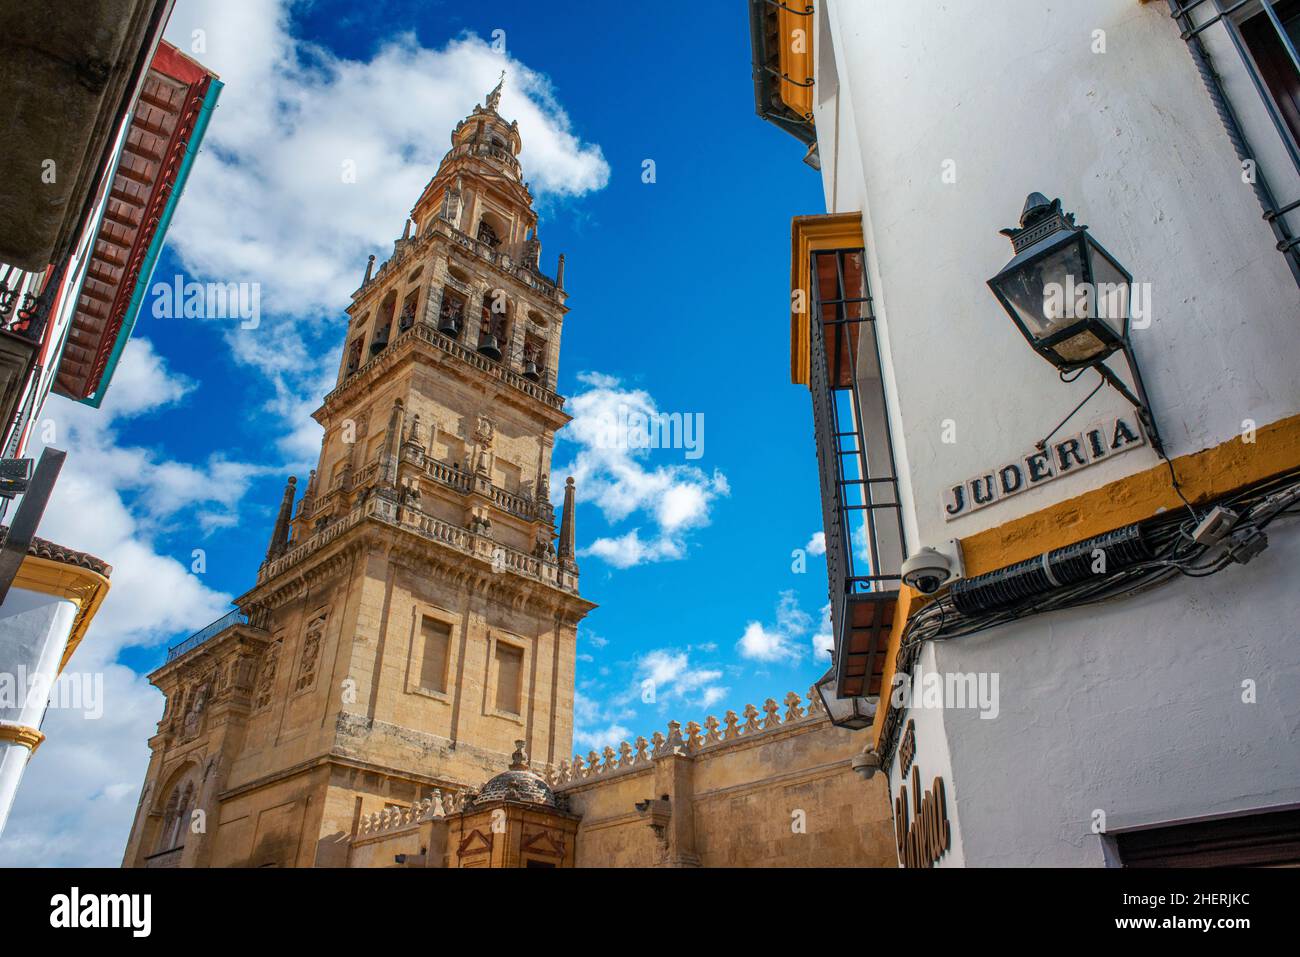 Shops bars and restaurants outside the La Mezquita Cathedral Mosque in the historic old town La Juderia, Cordoba, Andalucia, Spain.  Dance and celebra Stock Photo